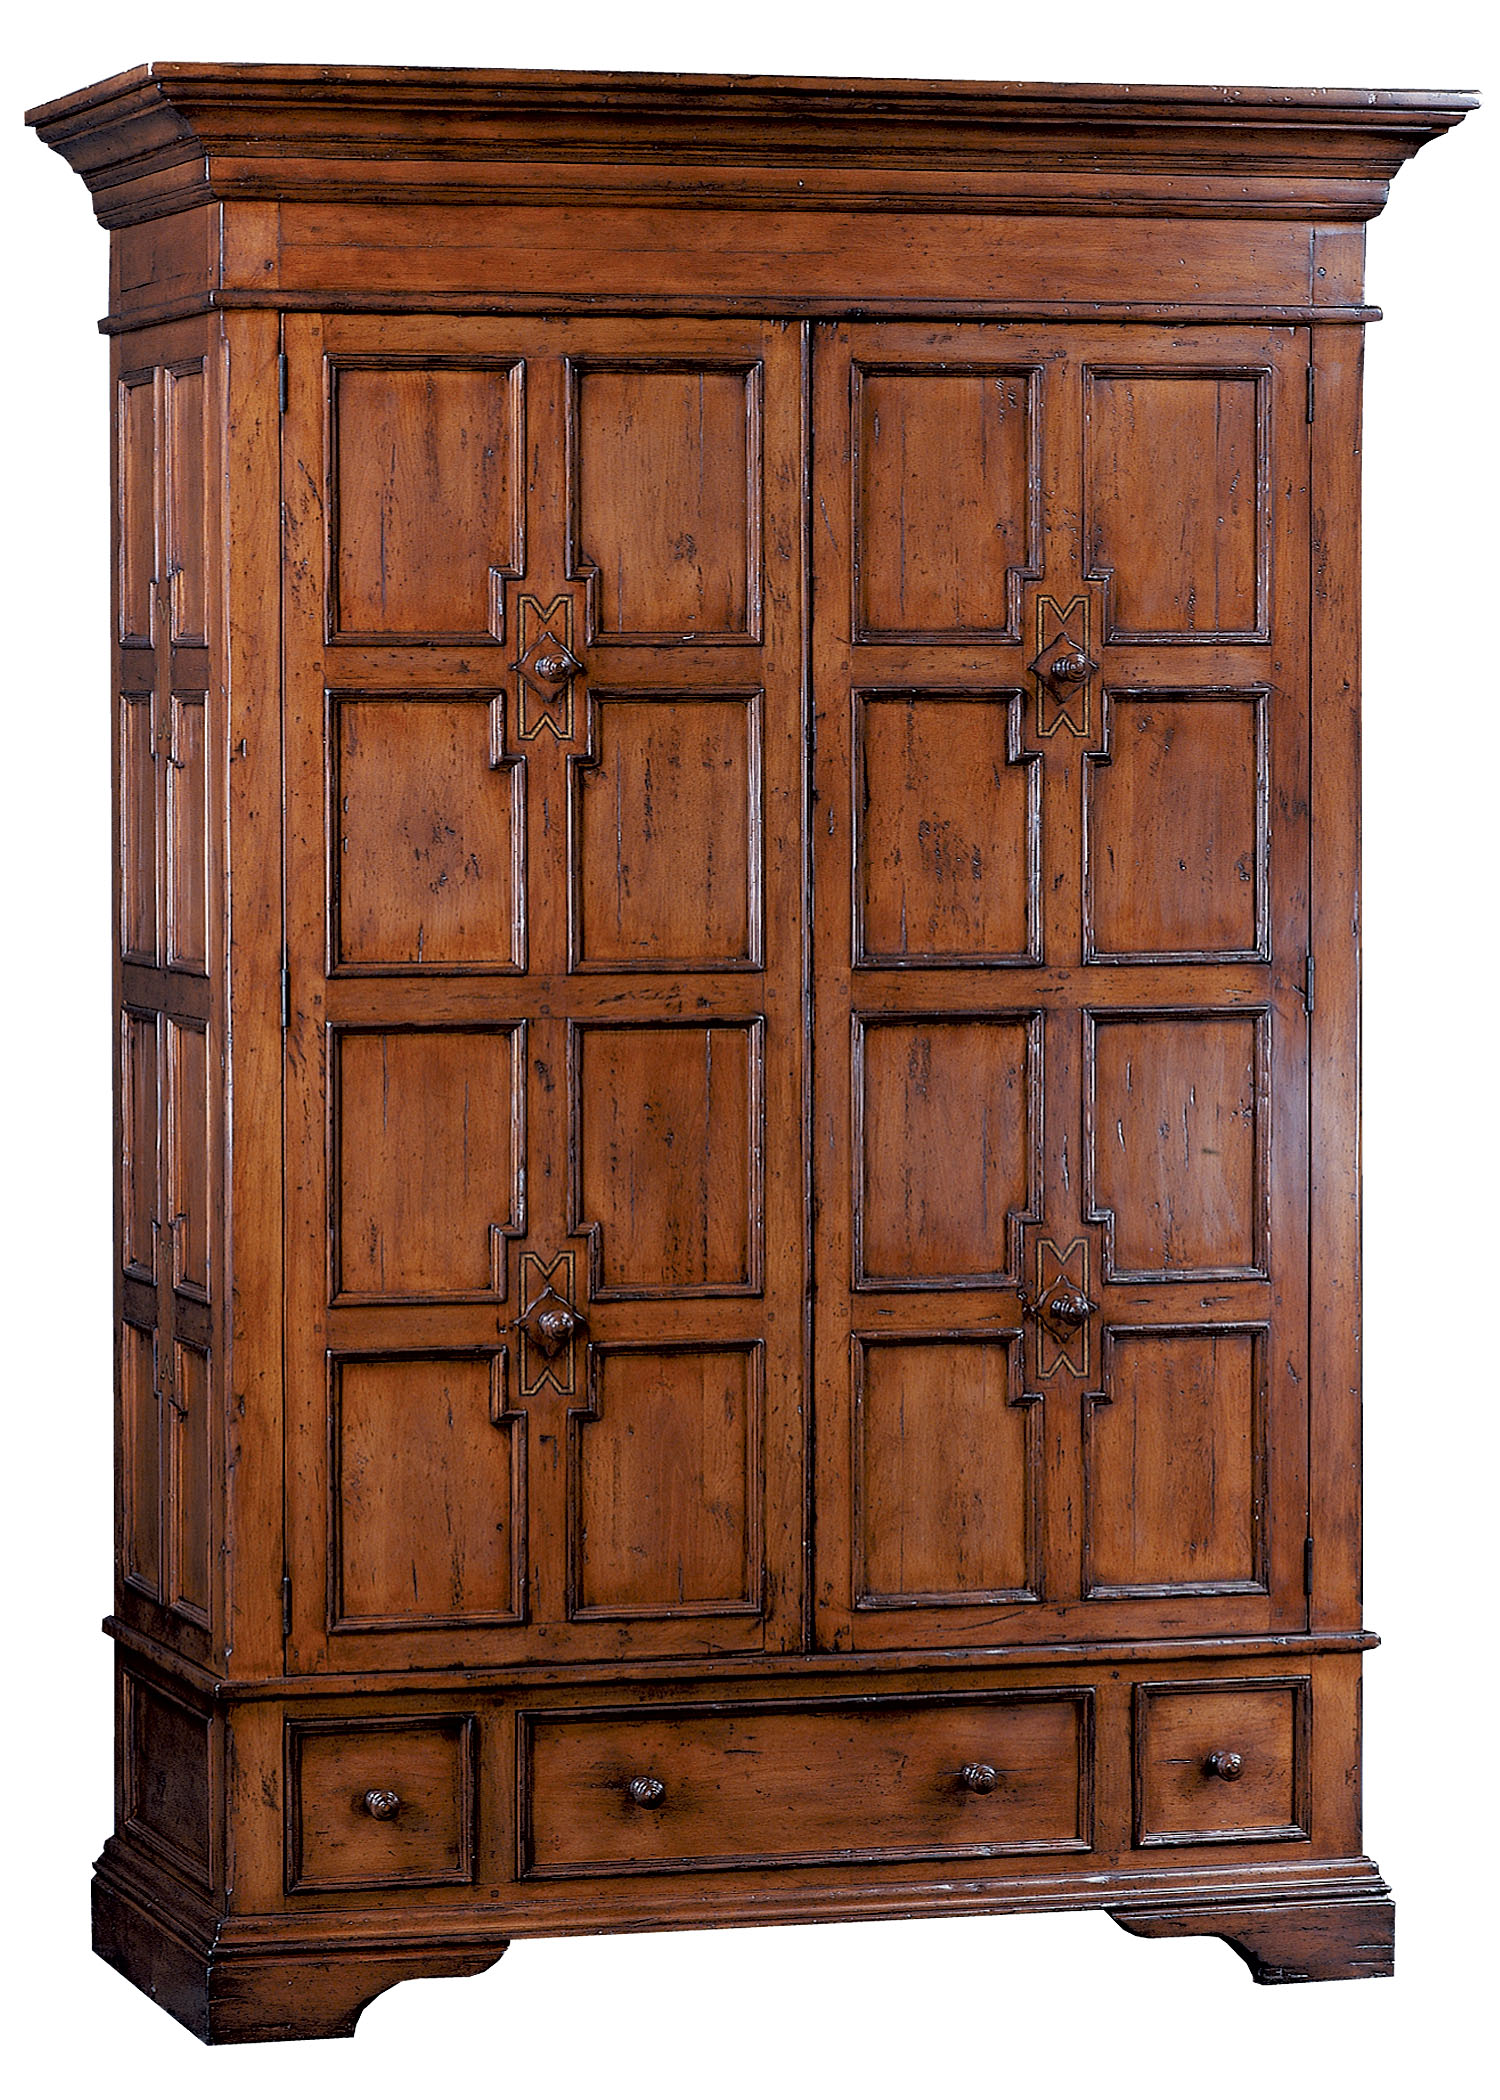 Malaga traditional armoire cabinet with doors and drawers by Woodland furniture in Idaho Falls